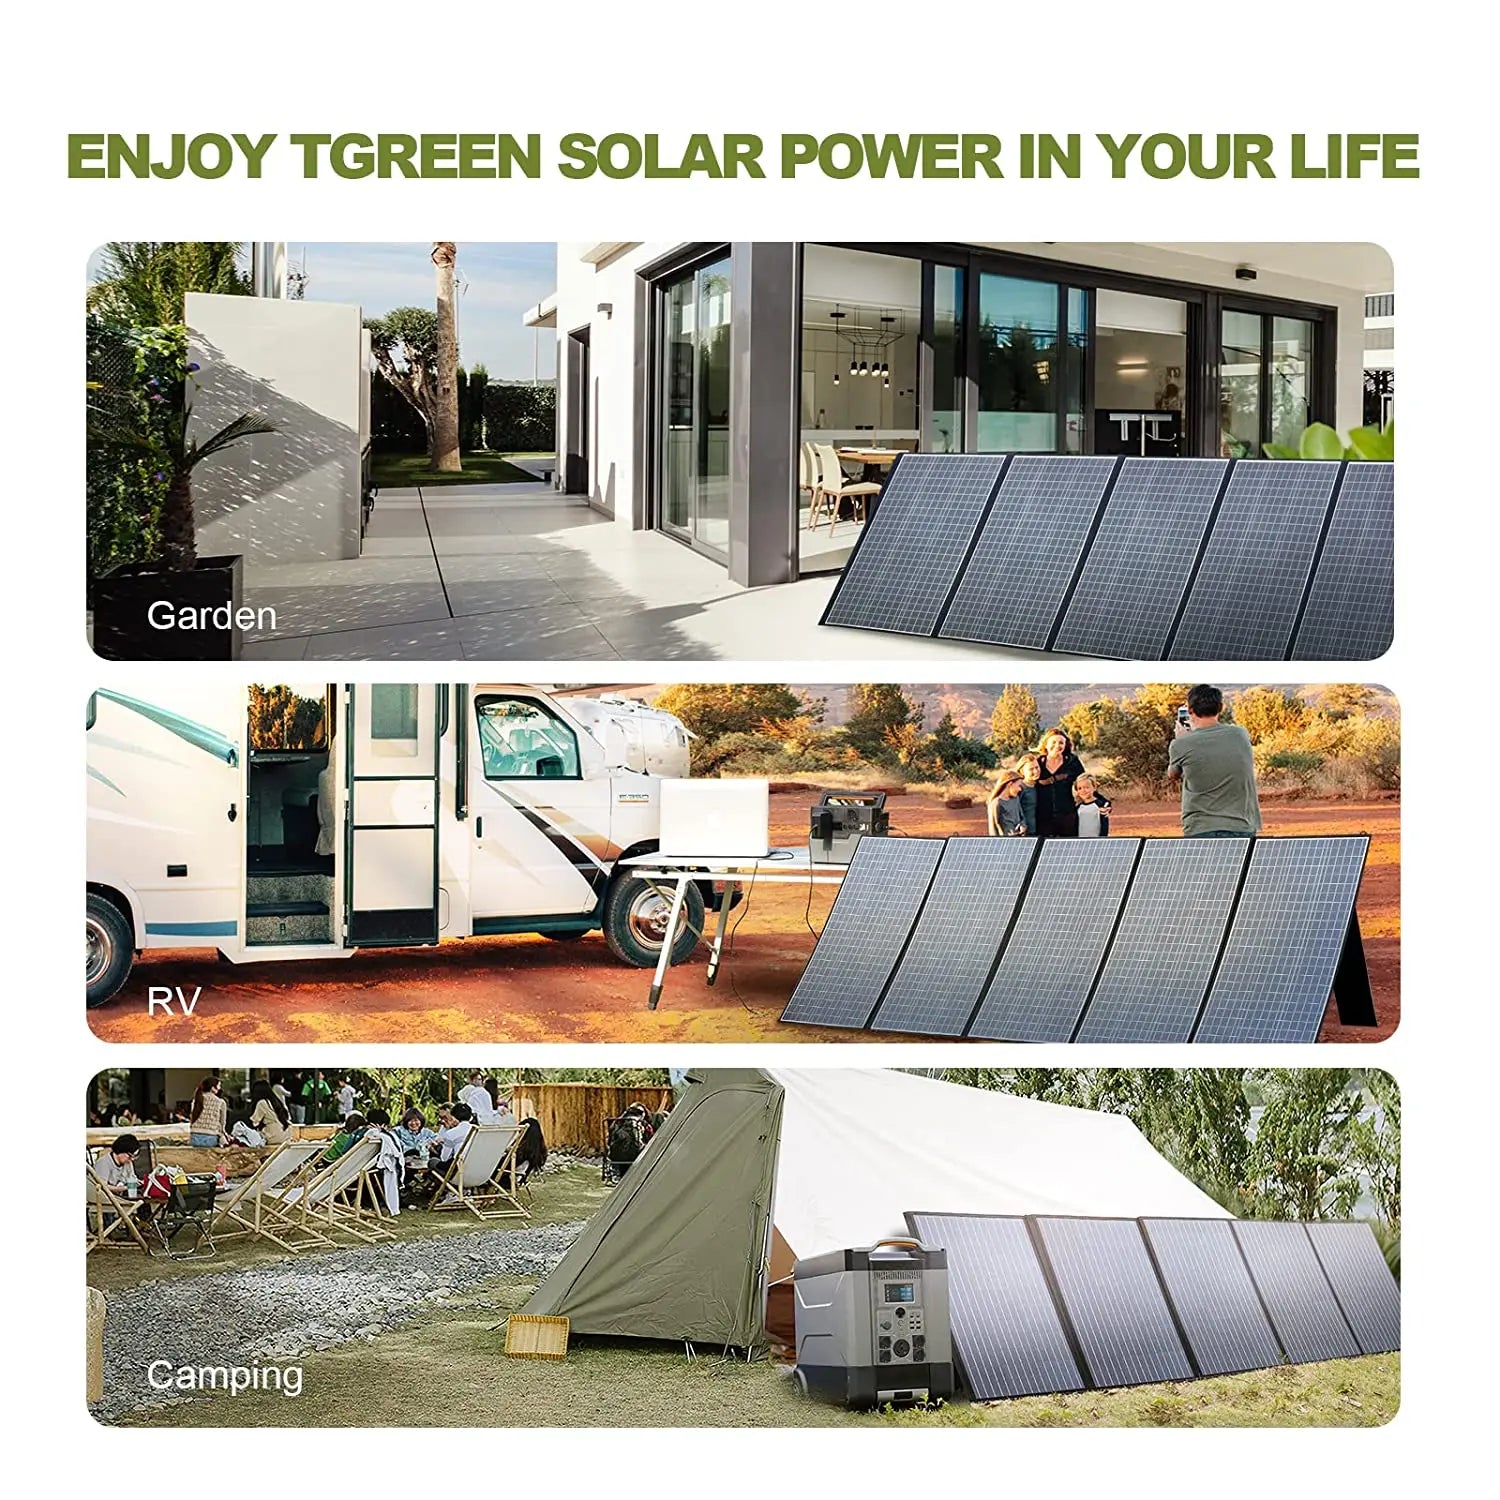 ALLPOWERS Foldable Solar Panel, Empower Your Life with Green Solar Power